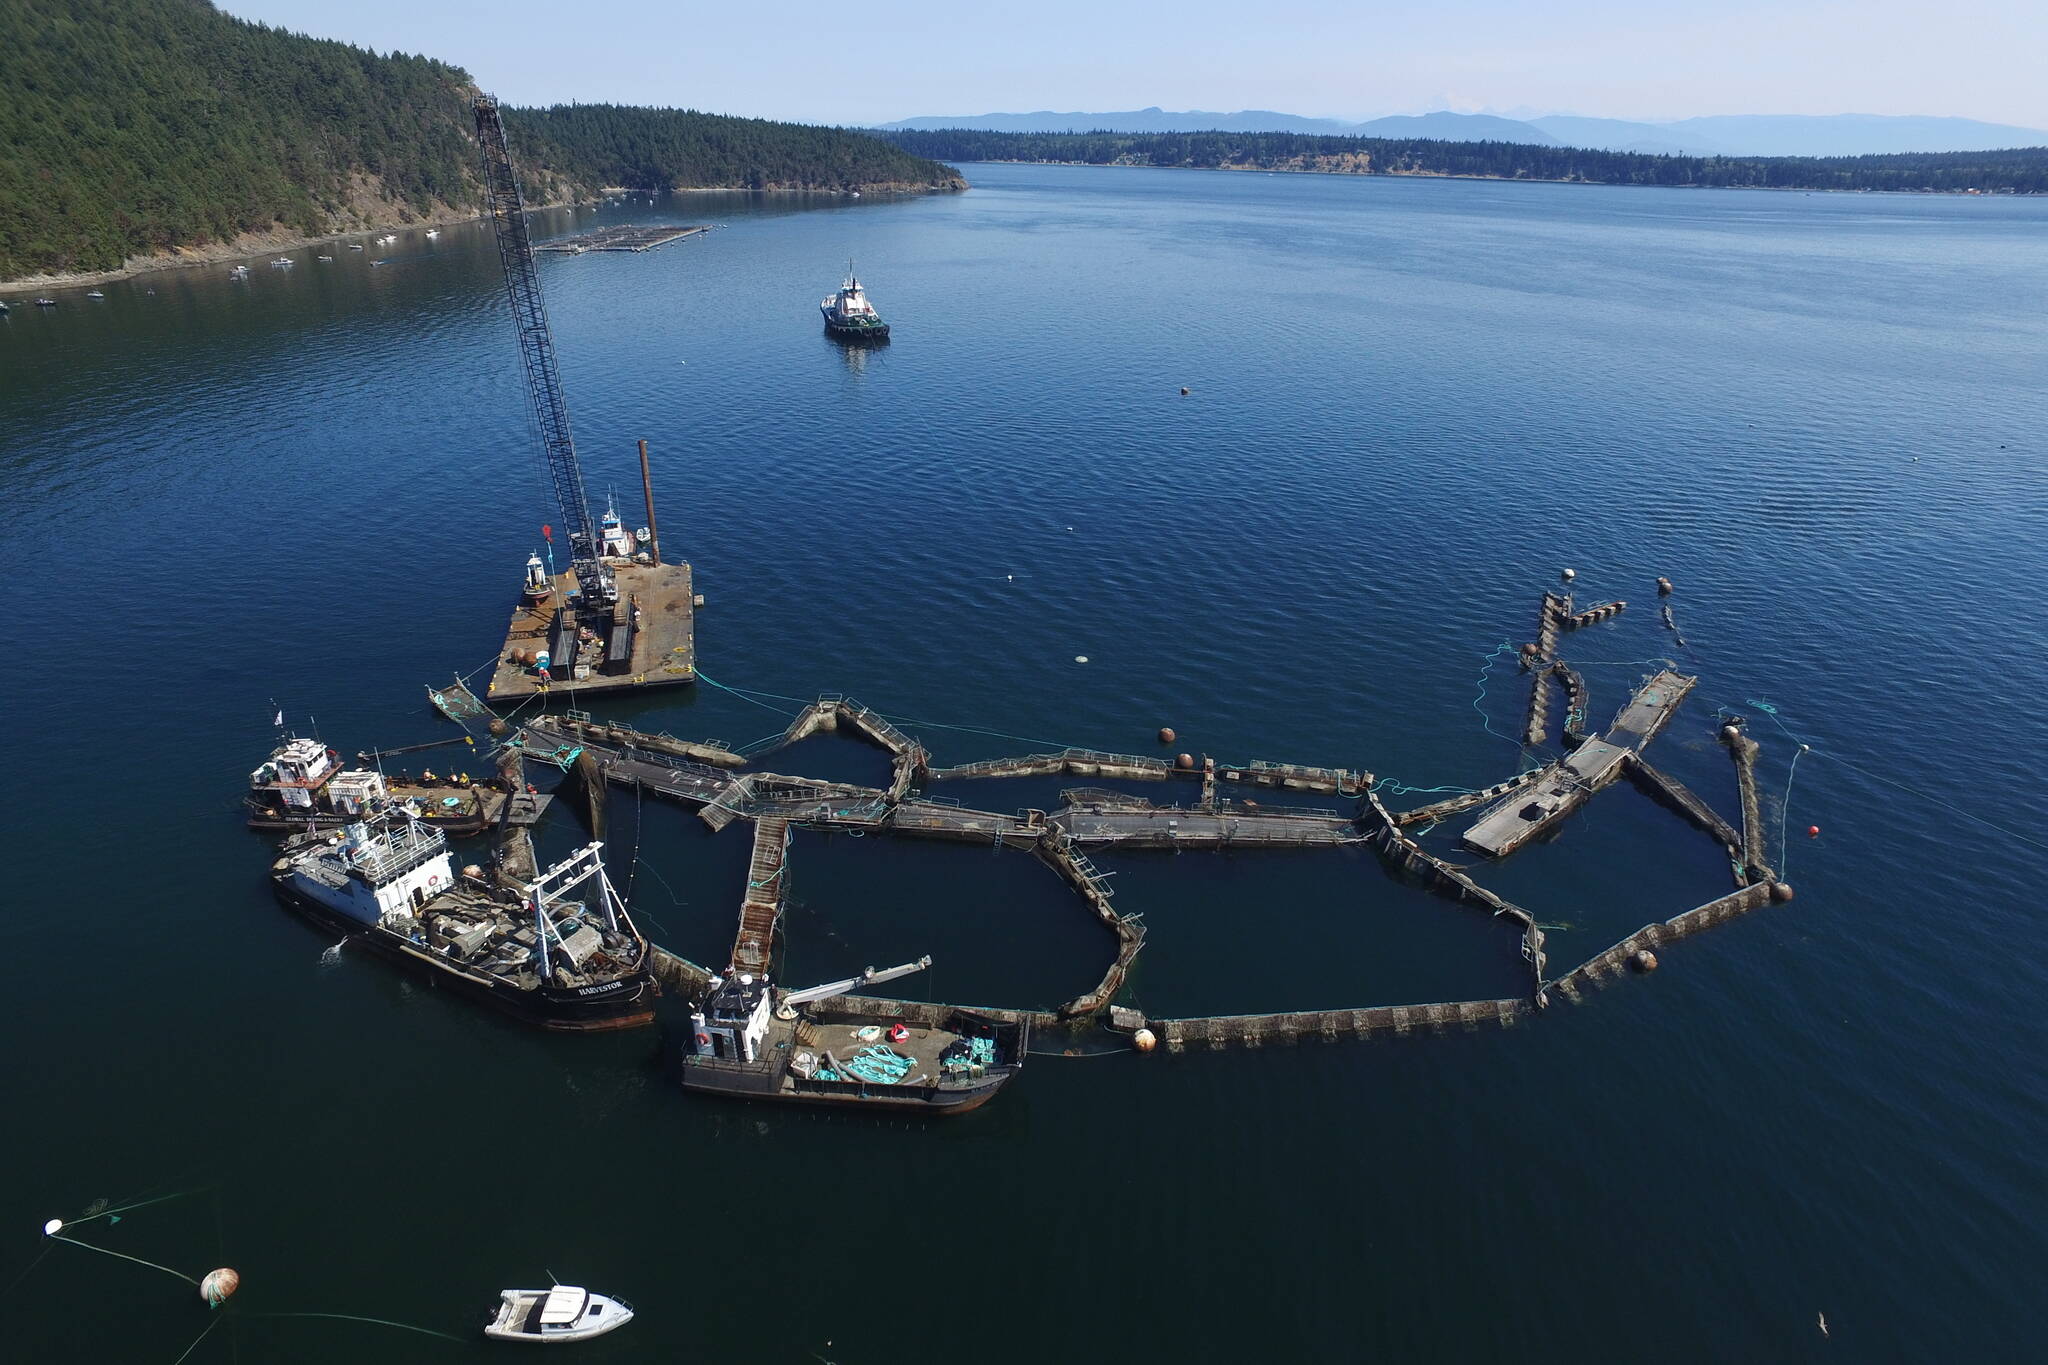 FILE - Recirculating Aquaculture Systems, which involve moving the fish farm to land as opposed to an open net fish farm, is one possible future for the aquaculture industry in British Columbia. This photo, of a boat and crane situated next to a collapsed “net pen” by Cooke Seafood off the coast of Cypress Island in Washington State in 2017, came when a net failure allowed tens of thousands of nonnative fish to escape. The incident resulted in a nearly $600,000 settlement to the Lummi Indian tribe over the net collapse and damage done to the native salmon population, and prompted the state government to end the practice of fish farming nonnative fish. regarding File Photo David Bergvall Washington State Dept. of Natural Resources via AP